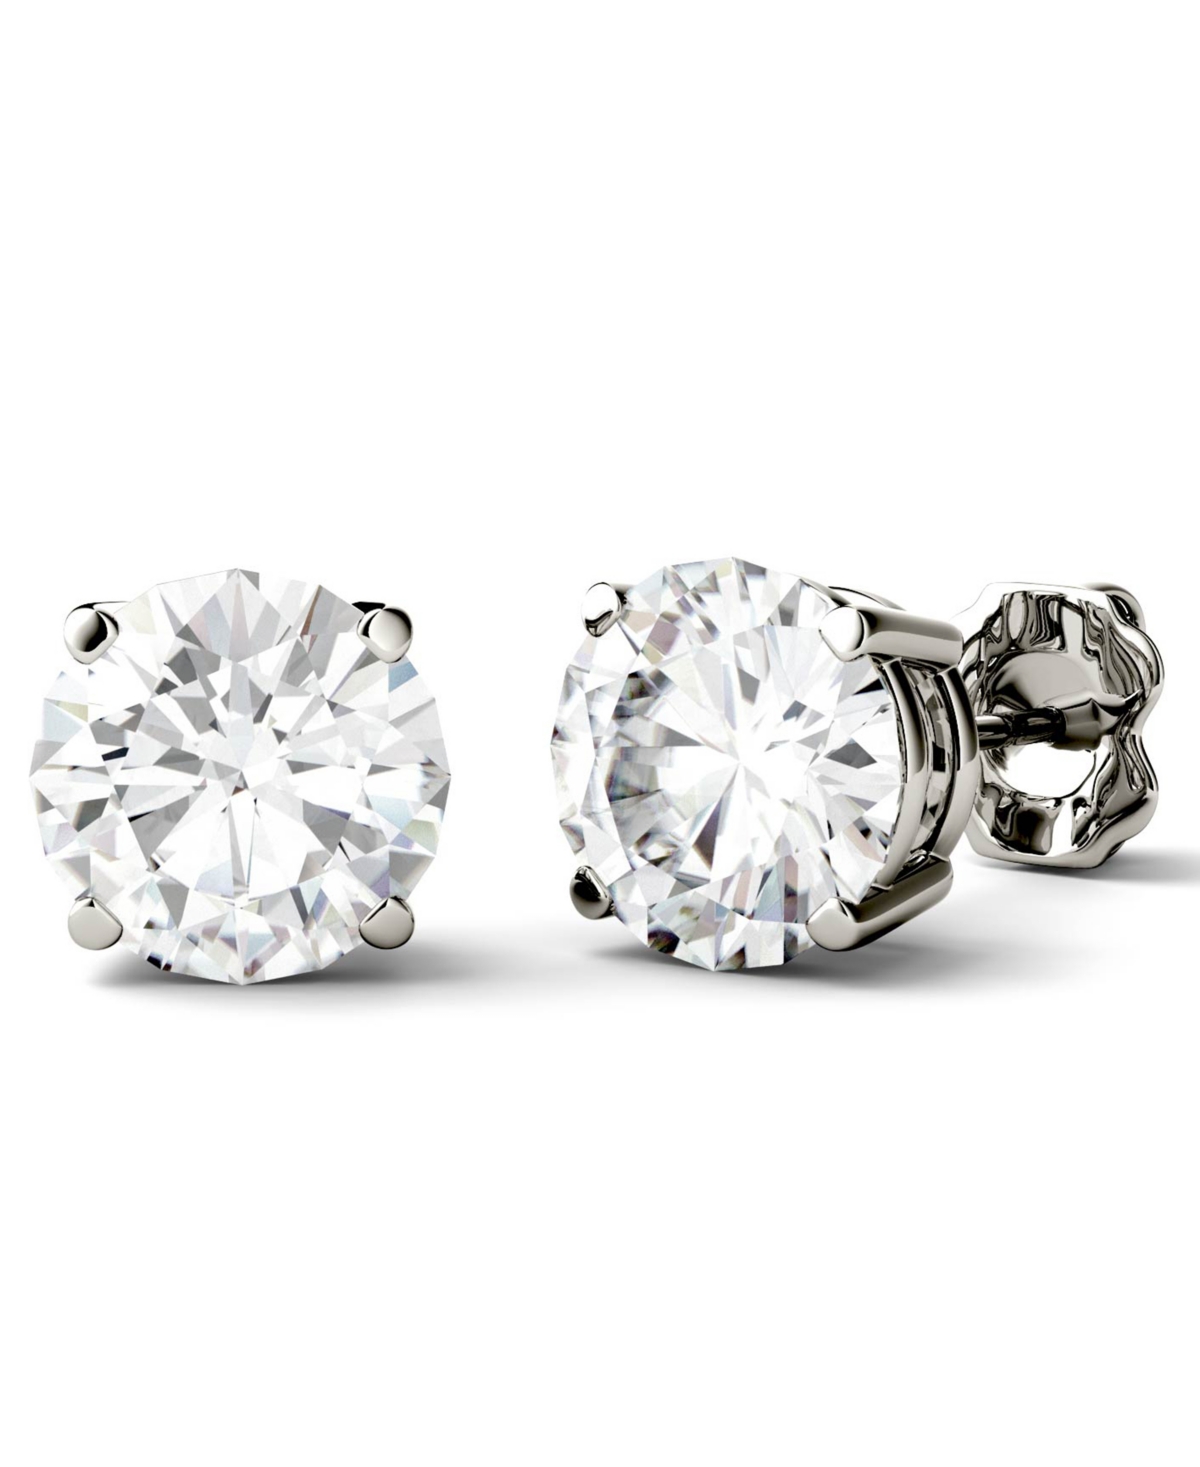 Moissanite Stud Earrings (3 ct. t.w. Diamond Equivalent) in 14k White or Yellow Gold - Gold